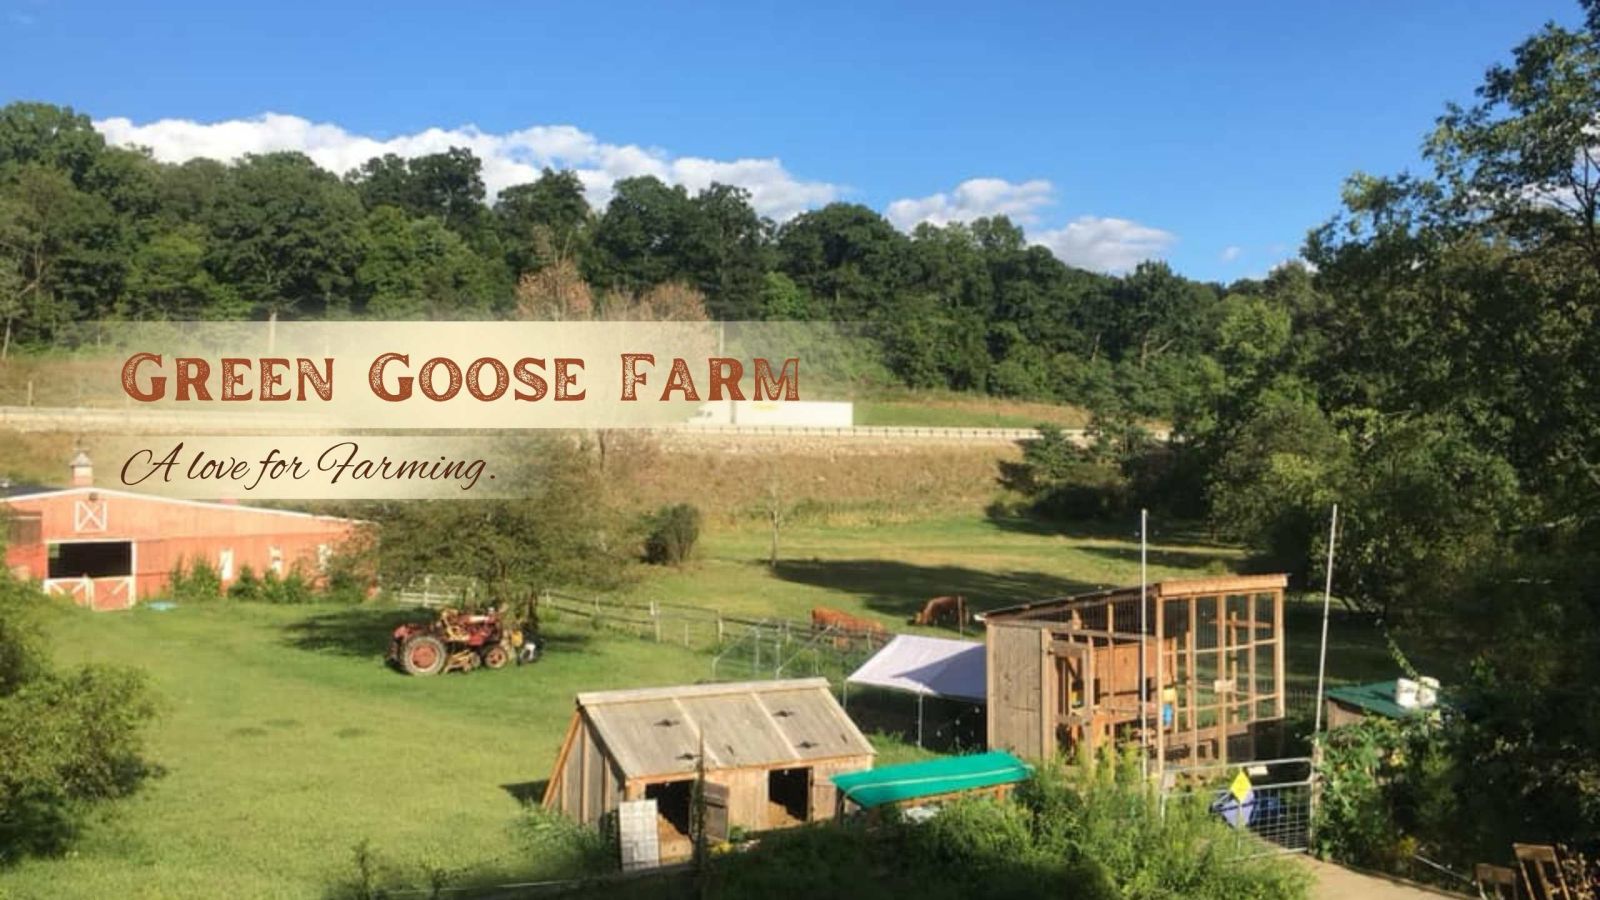 Green Goose Farm landscape photo with overlay saying "green goose farm, a love for farming"